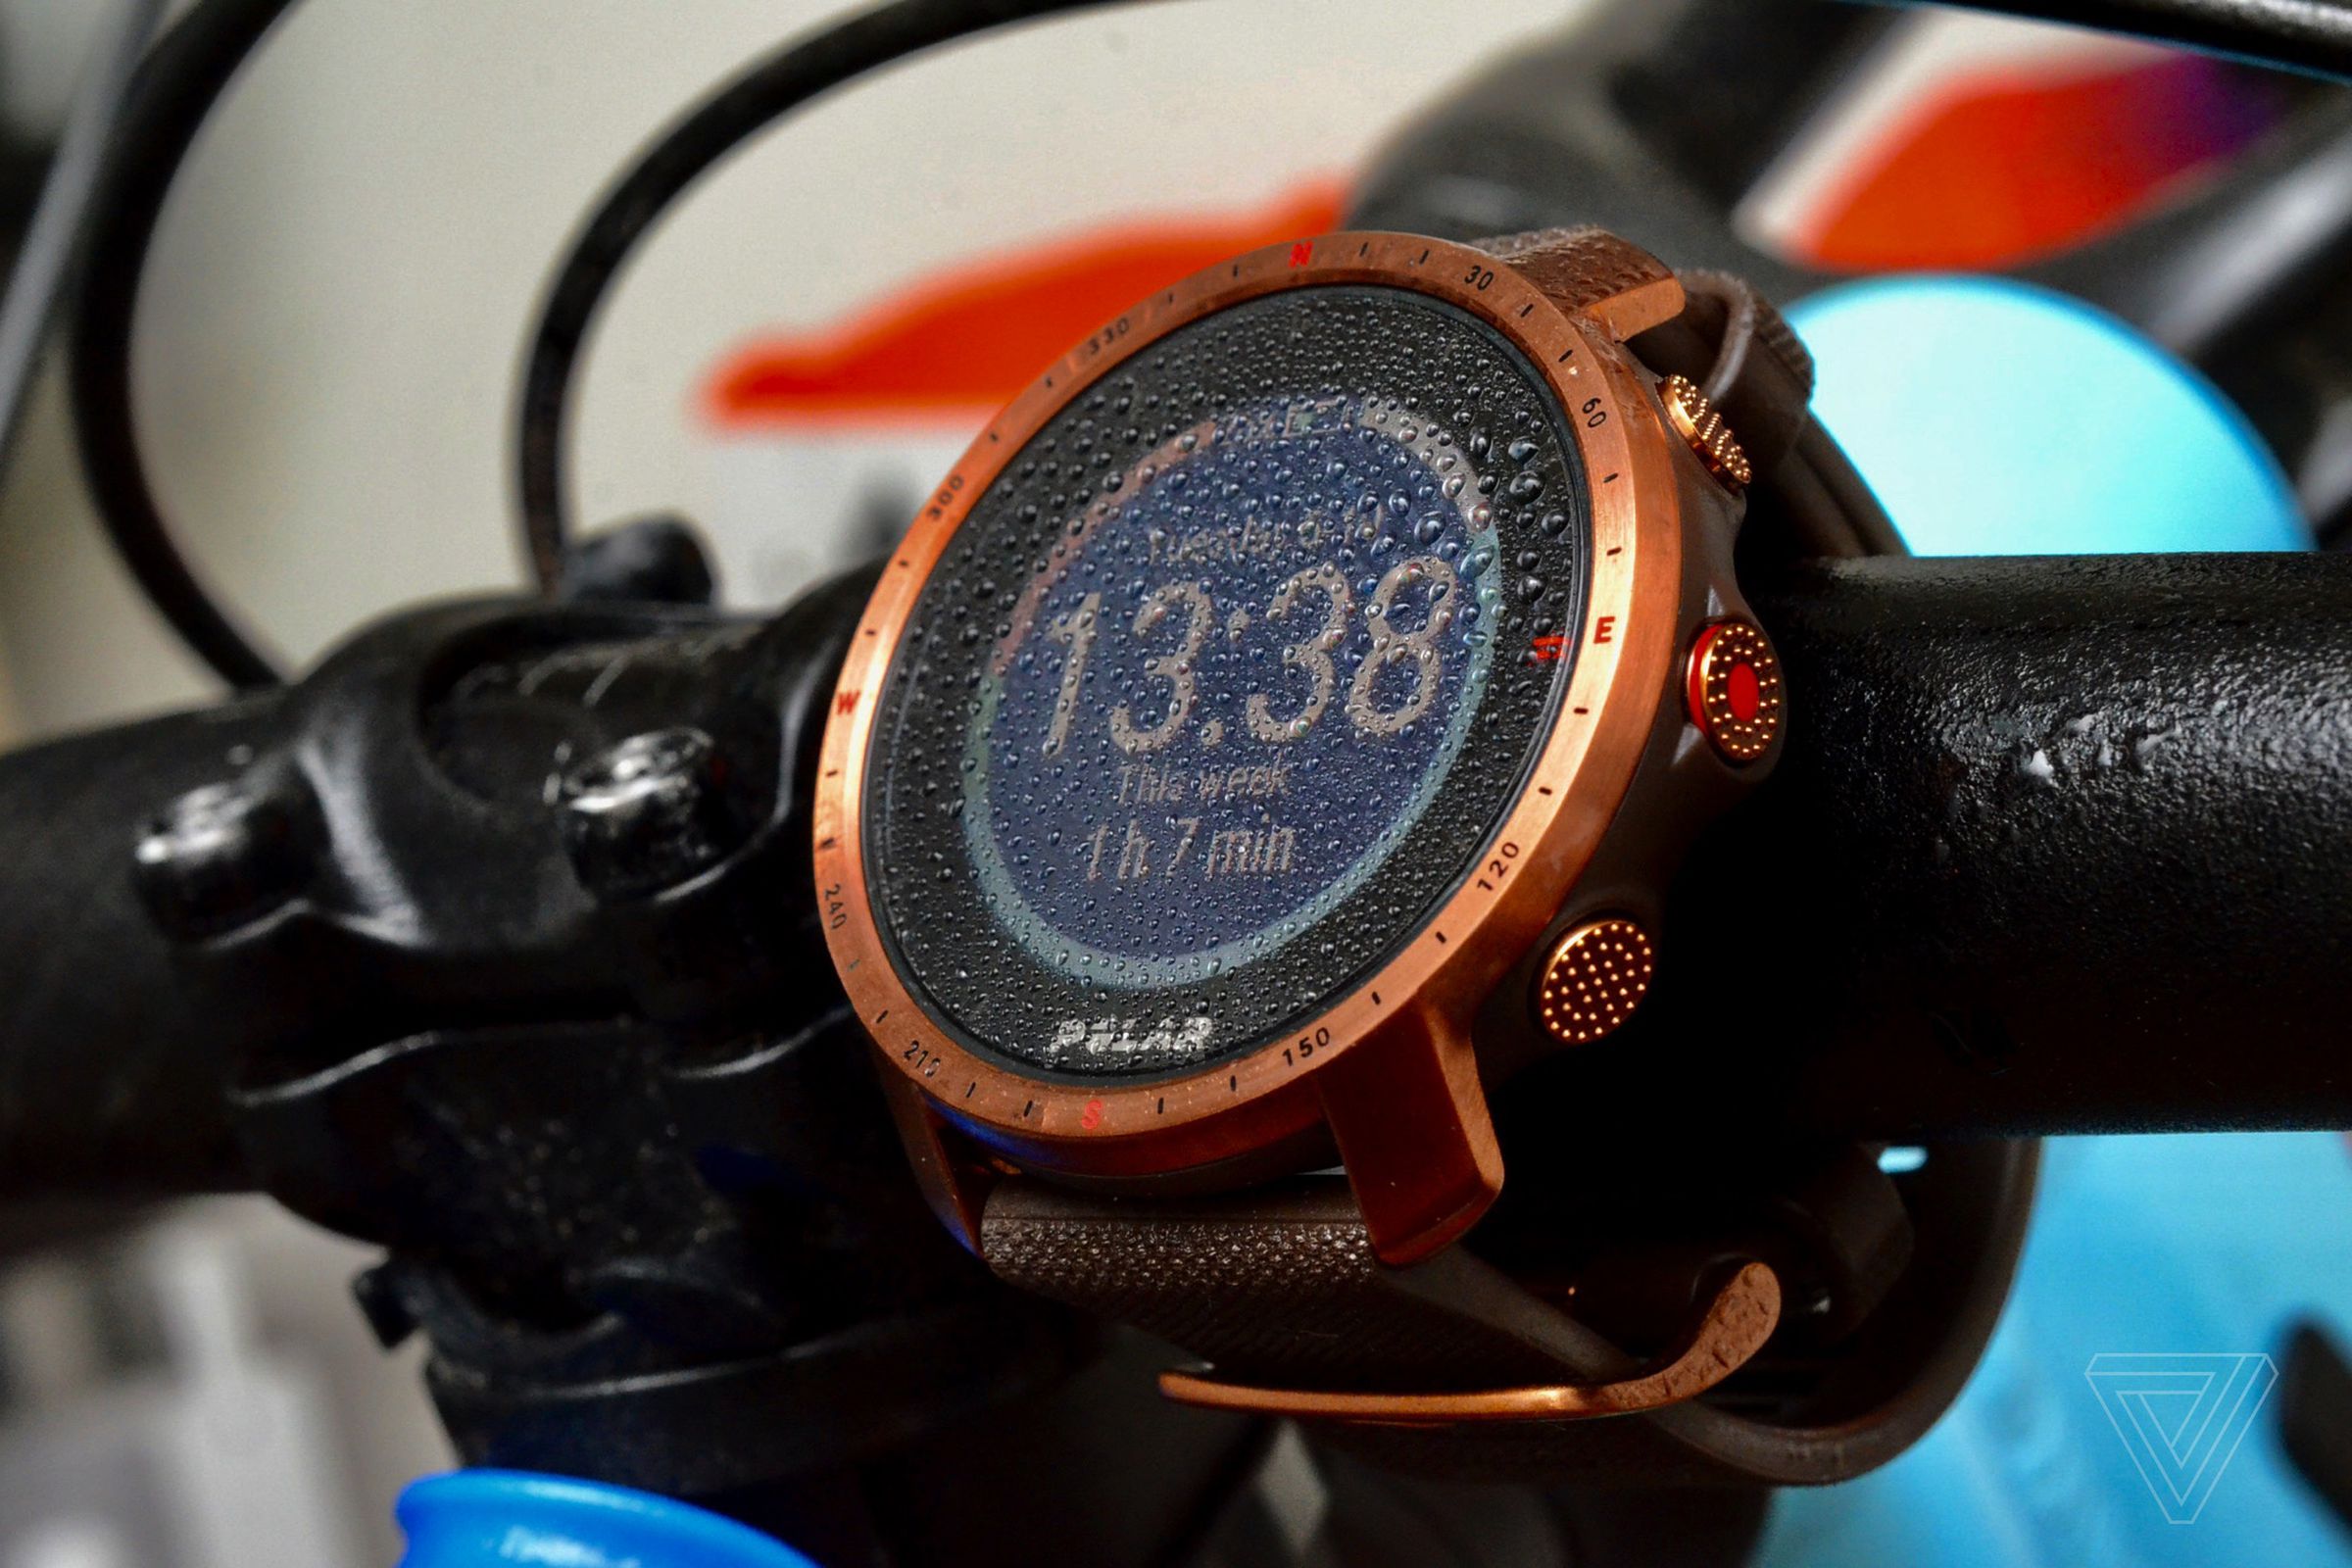 The Polar Grit X Pro (shown in copper colorway) features a sapphire lens and rugged FKM strap.